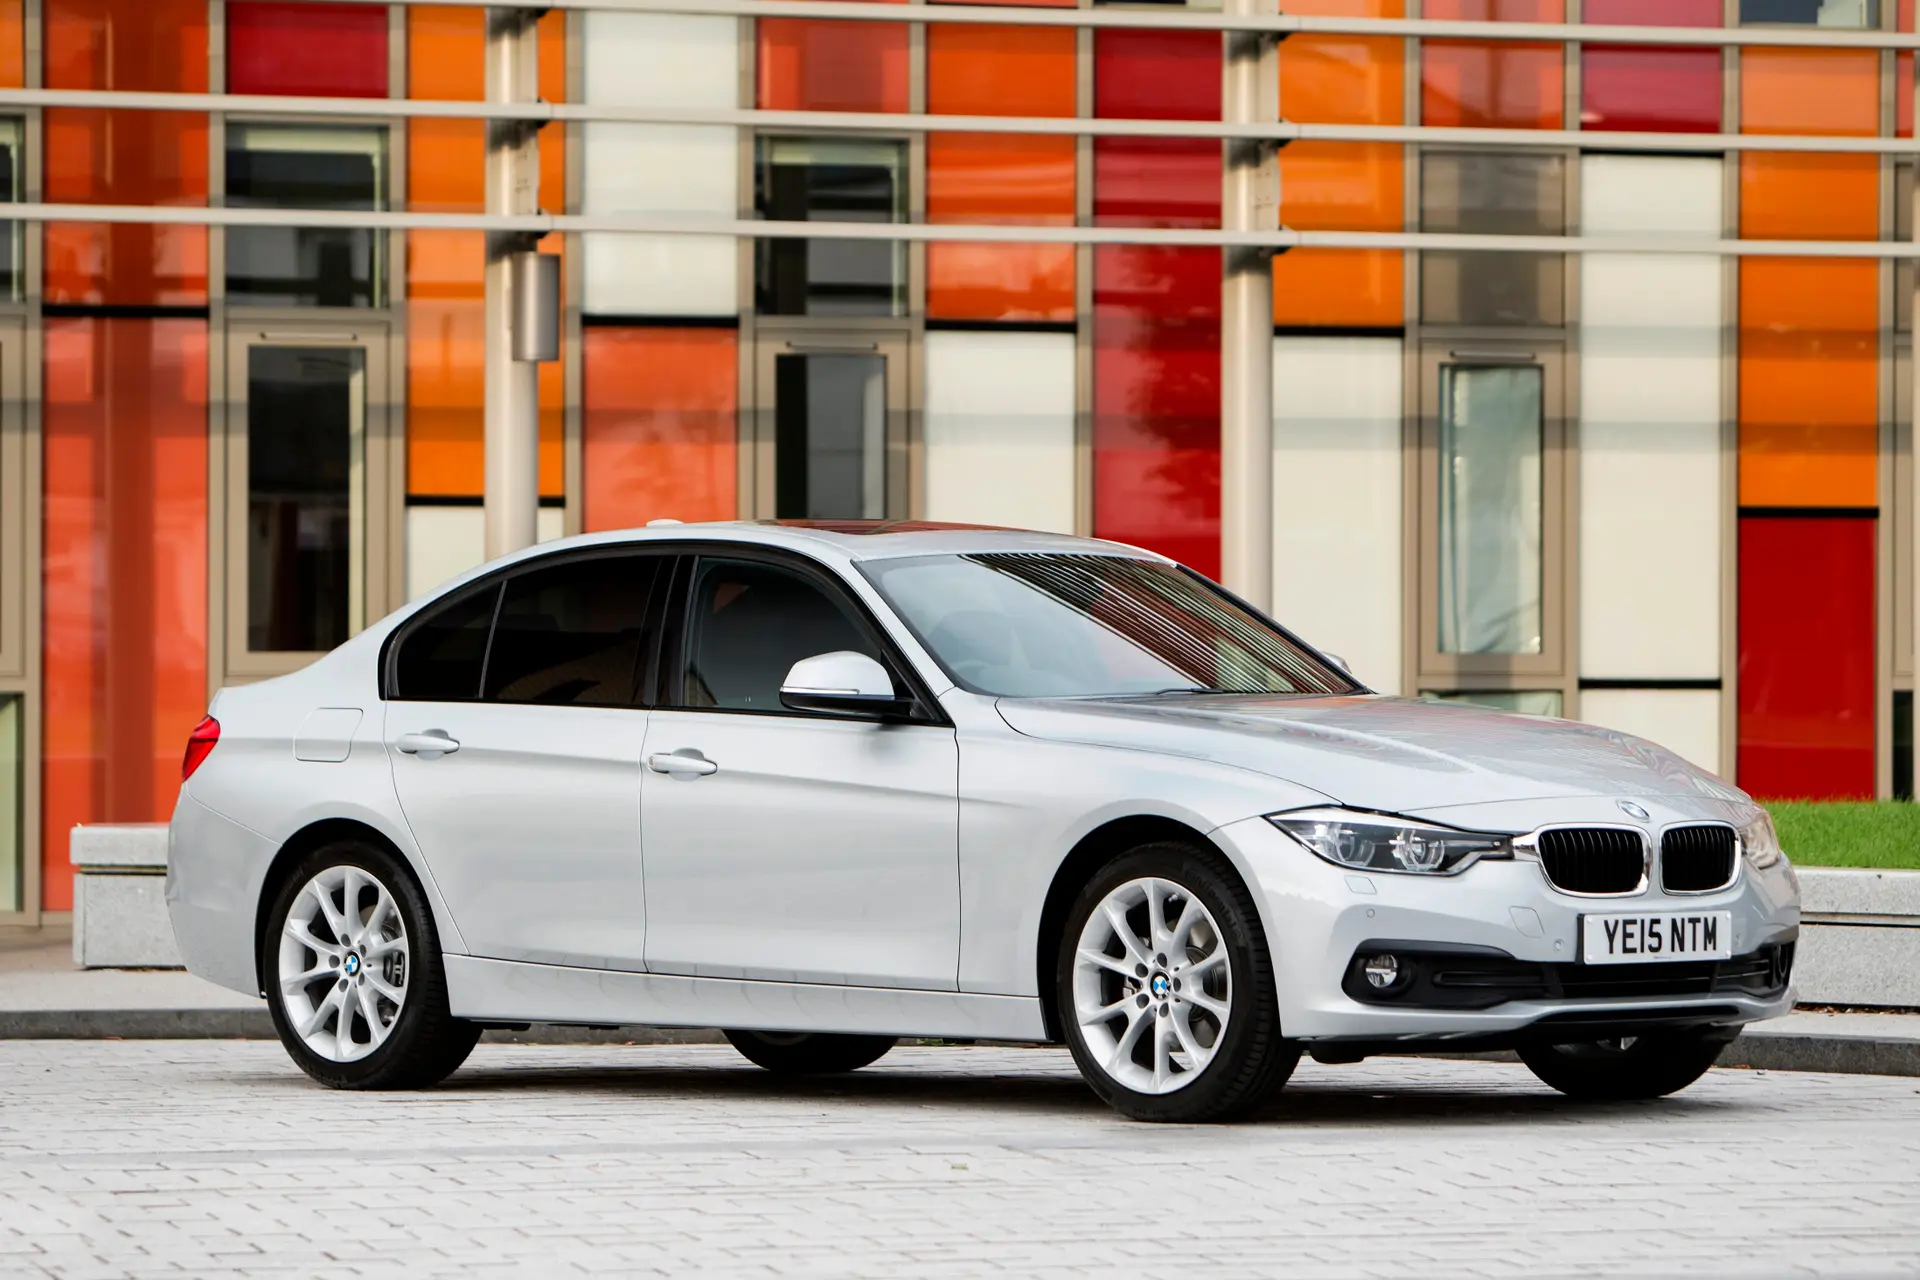 BMW 3 Series (2012-2018) Review: Exterior front three quarter photo of the BMW 3 Series